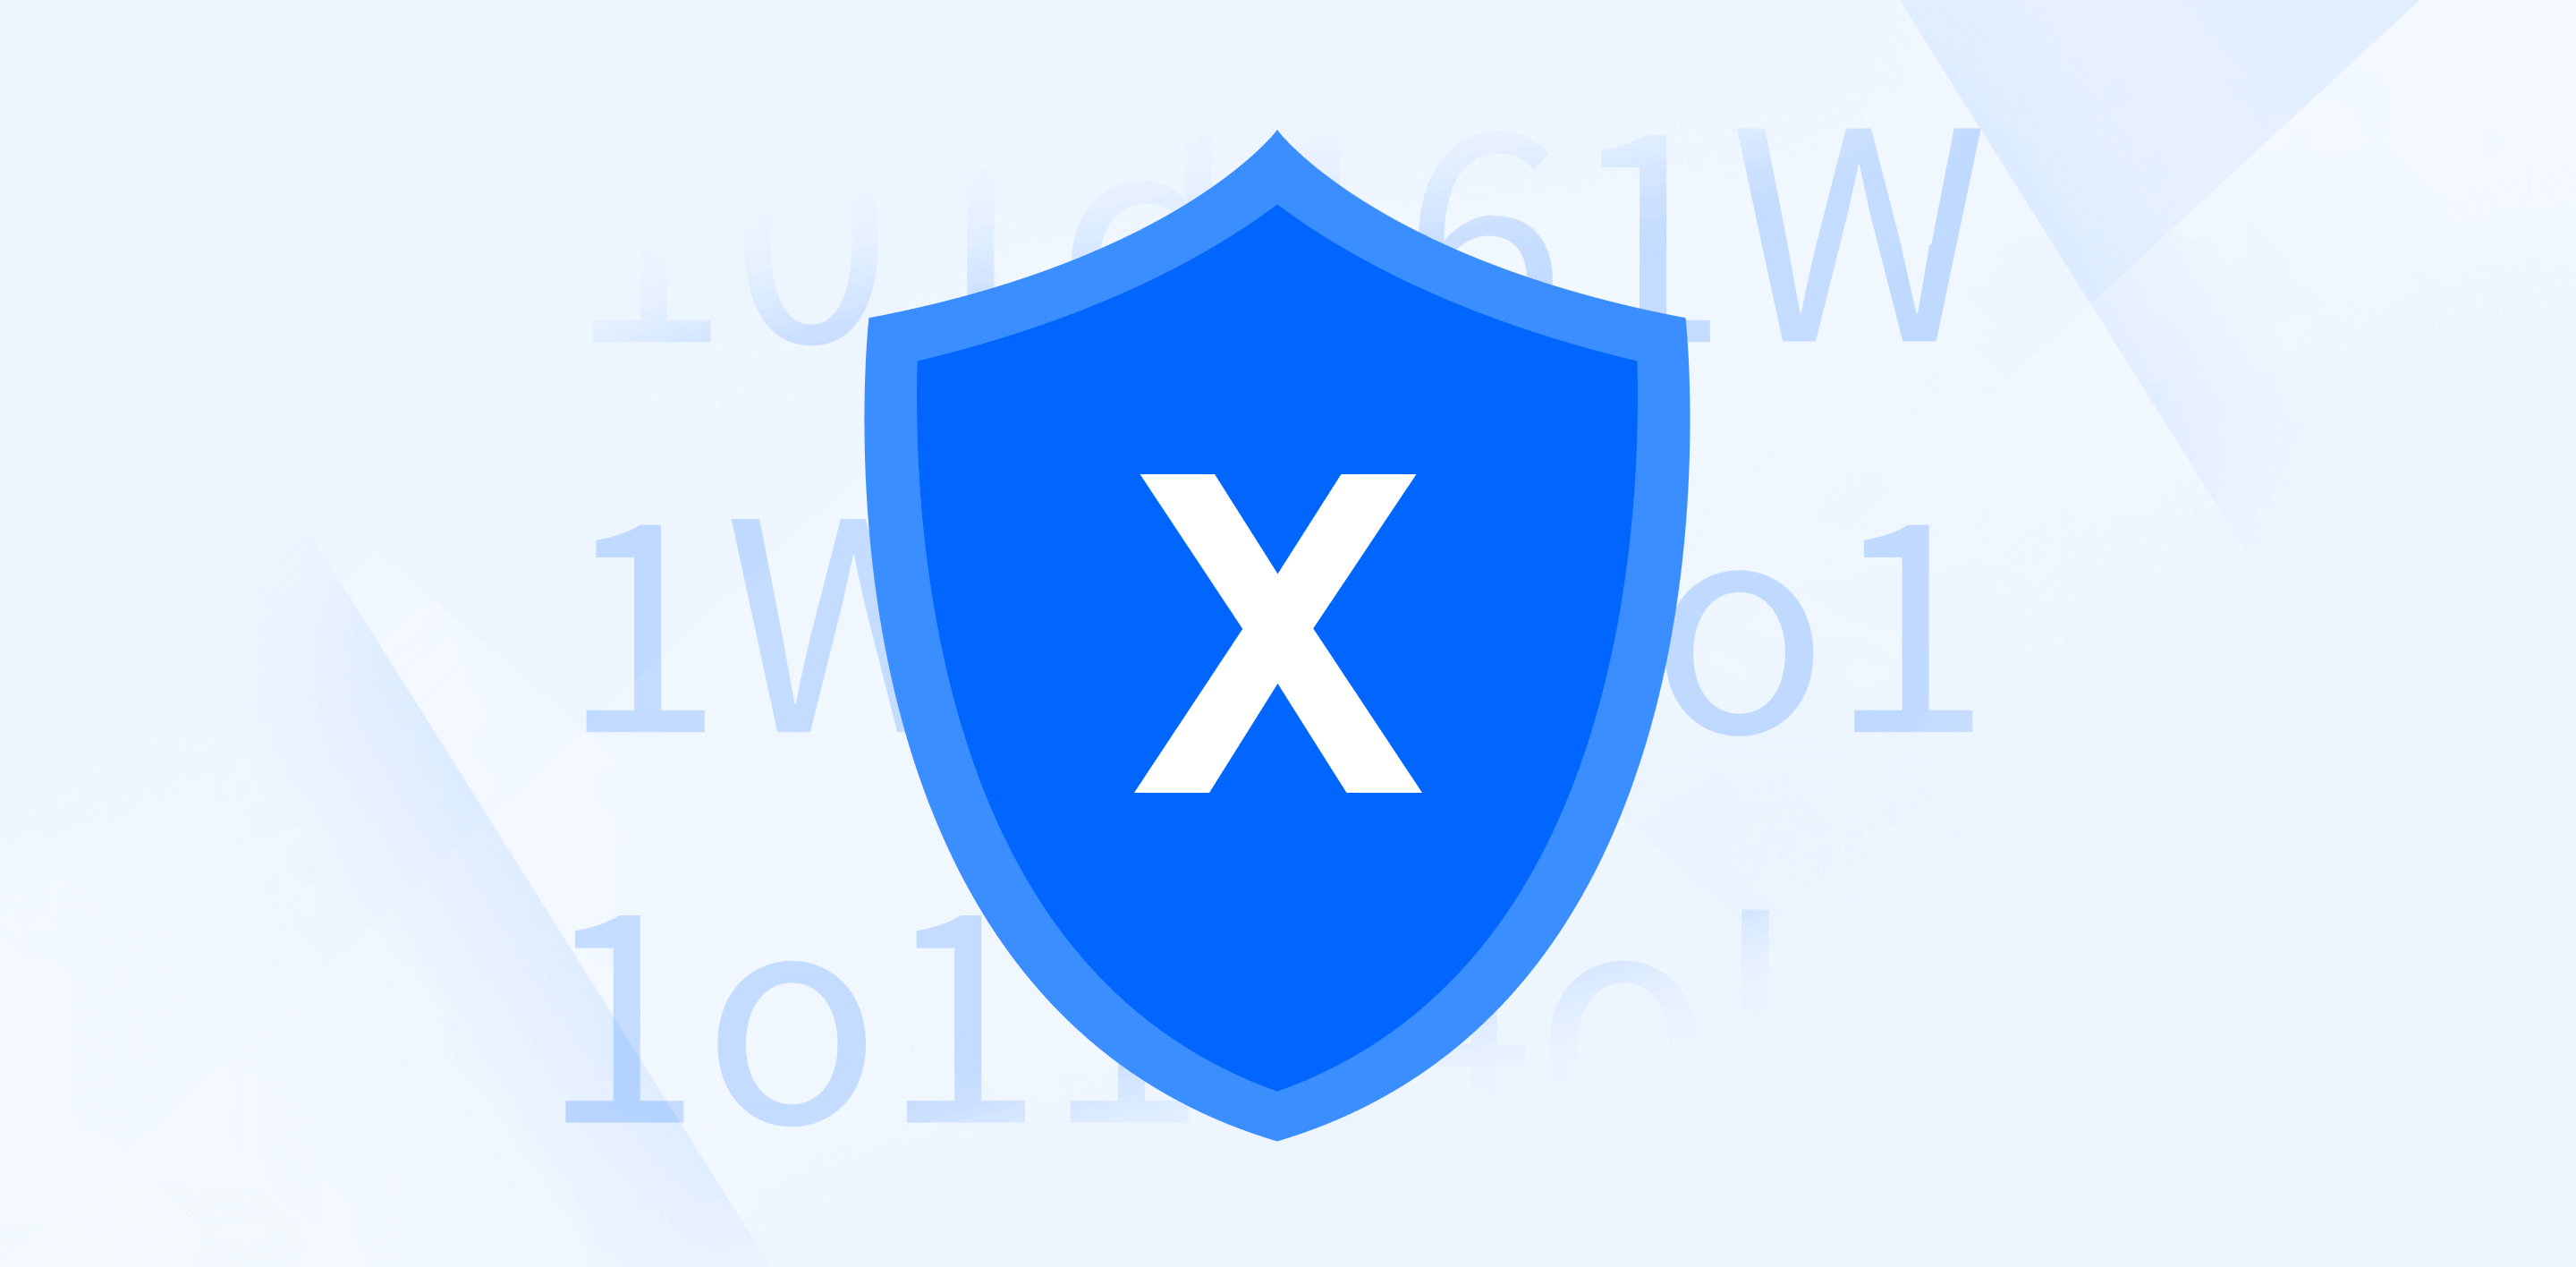 How Internxt protects user data.